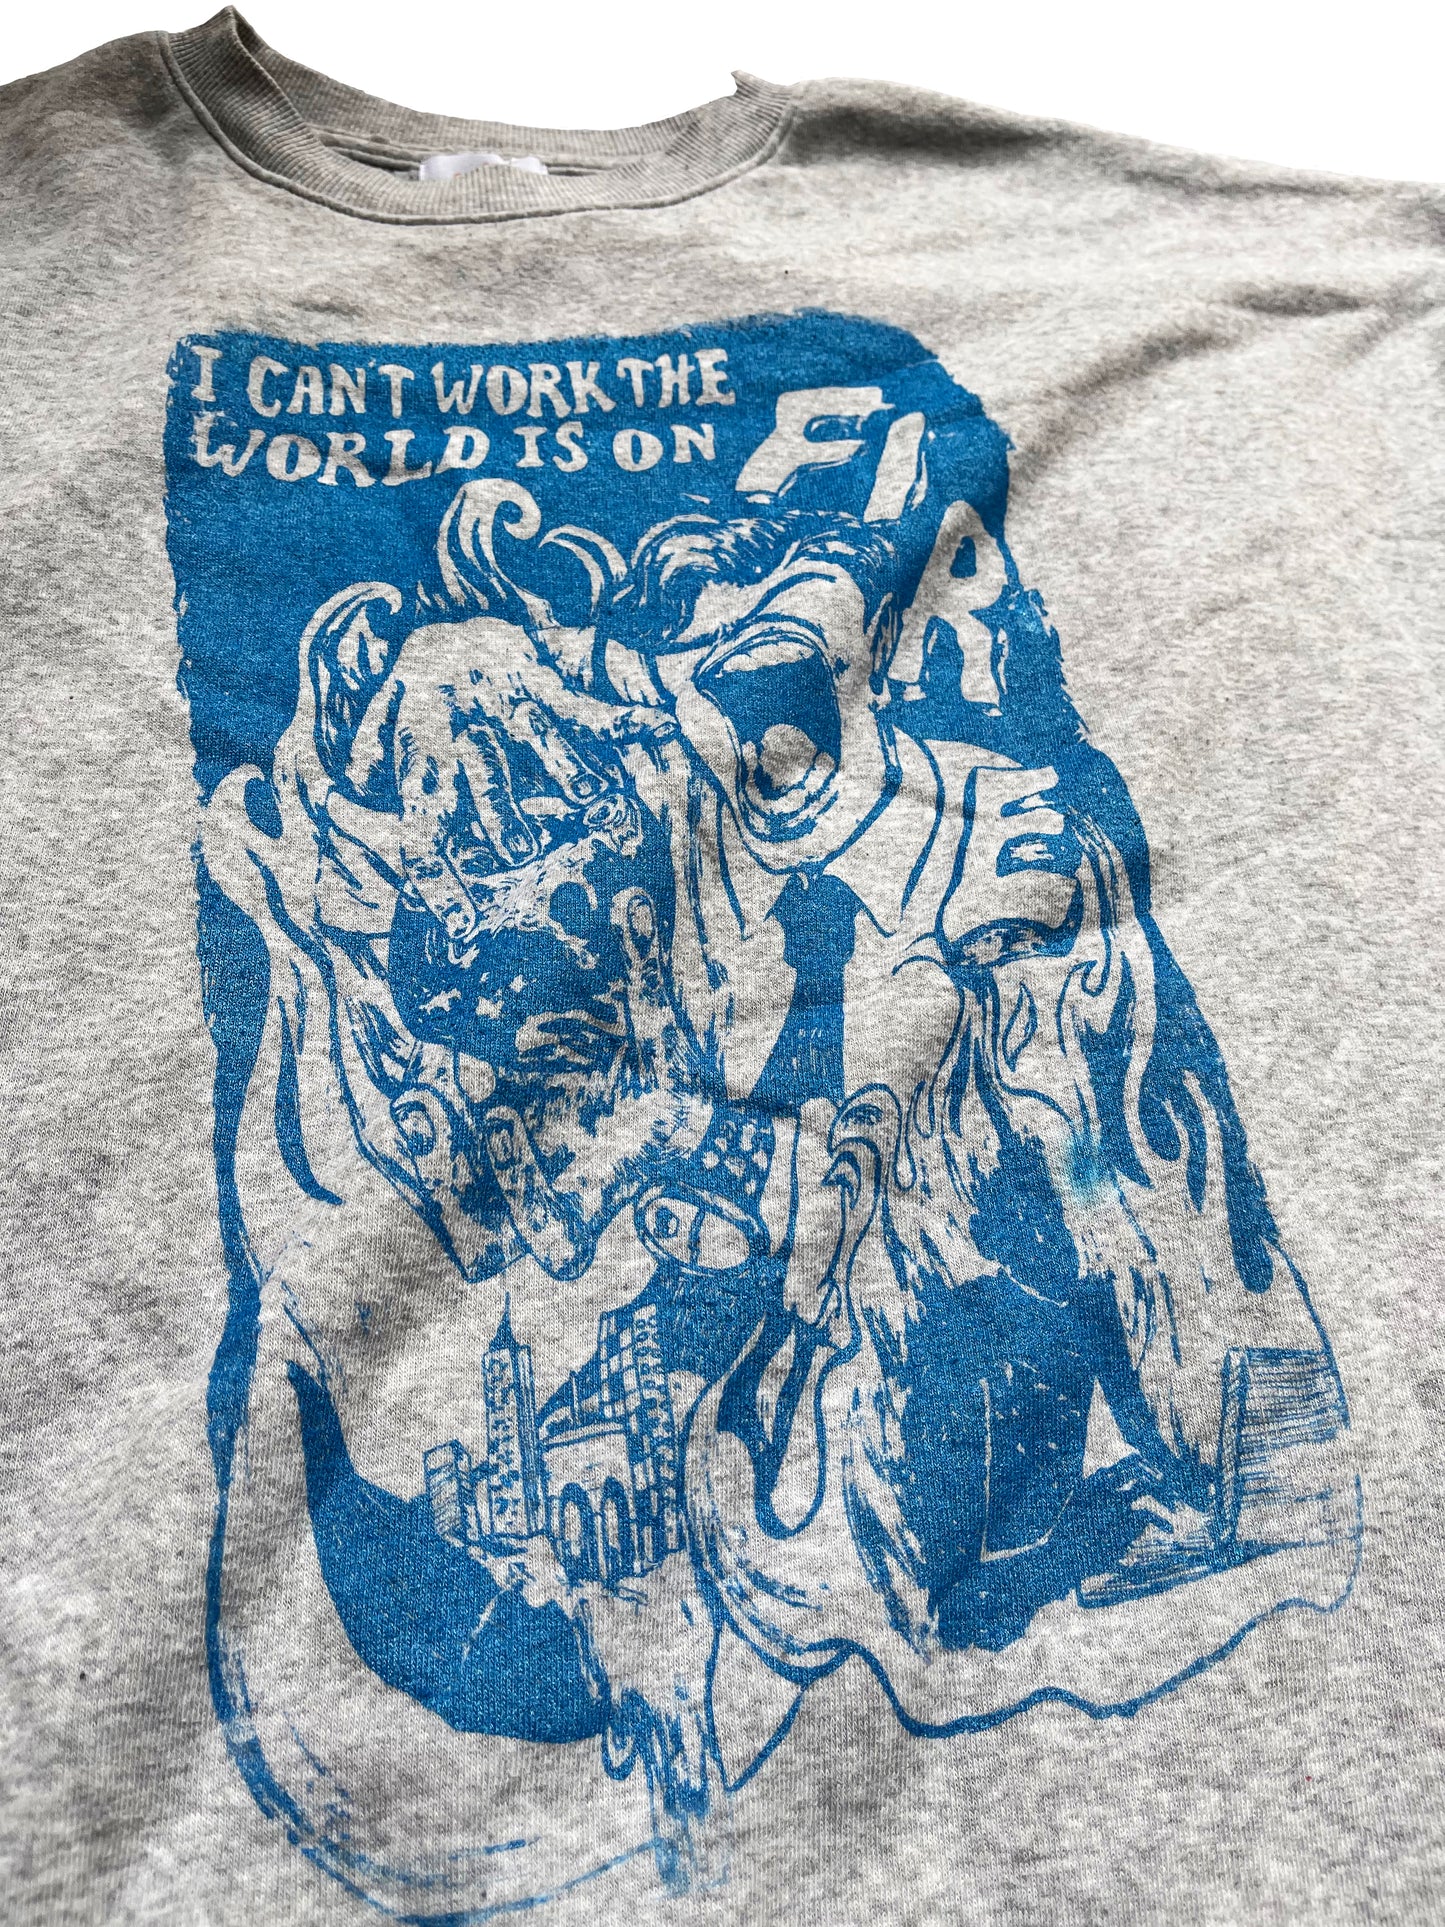 2x I Can't Work the World is on Fire gray sweater graphic tee 02